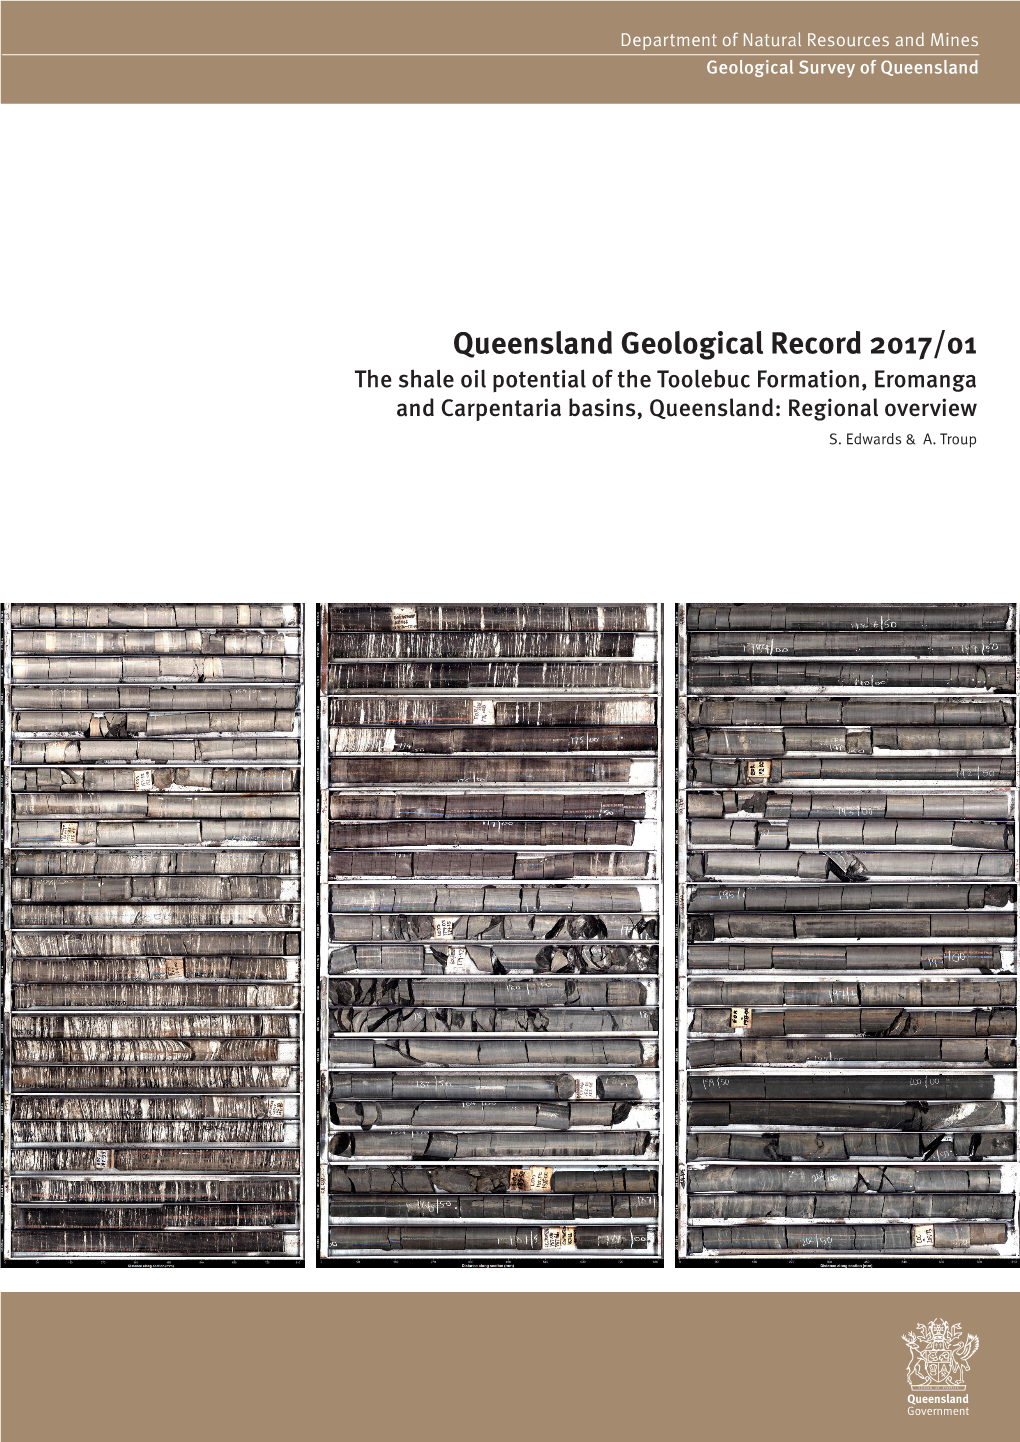 Queensland Geological Record 2017/01 the Shale Oil Potential of the Toolebuc Formation, Eromanga and Carpentaria Basins, Queensland: Regional Overview S